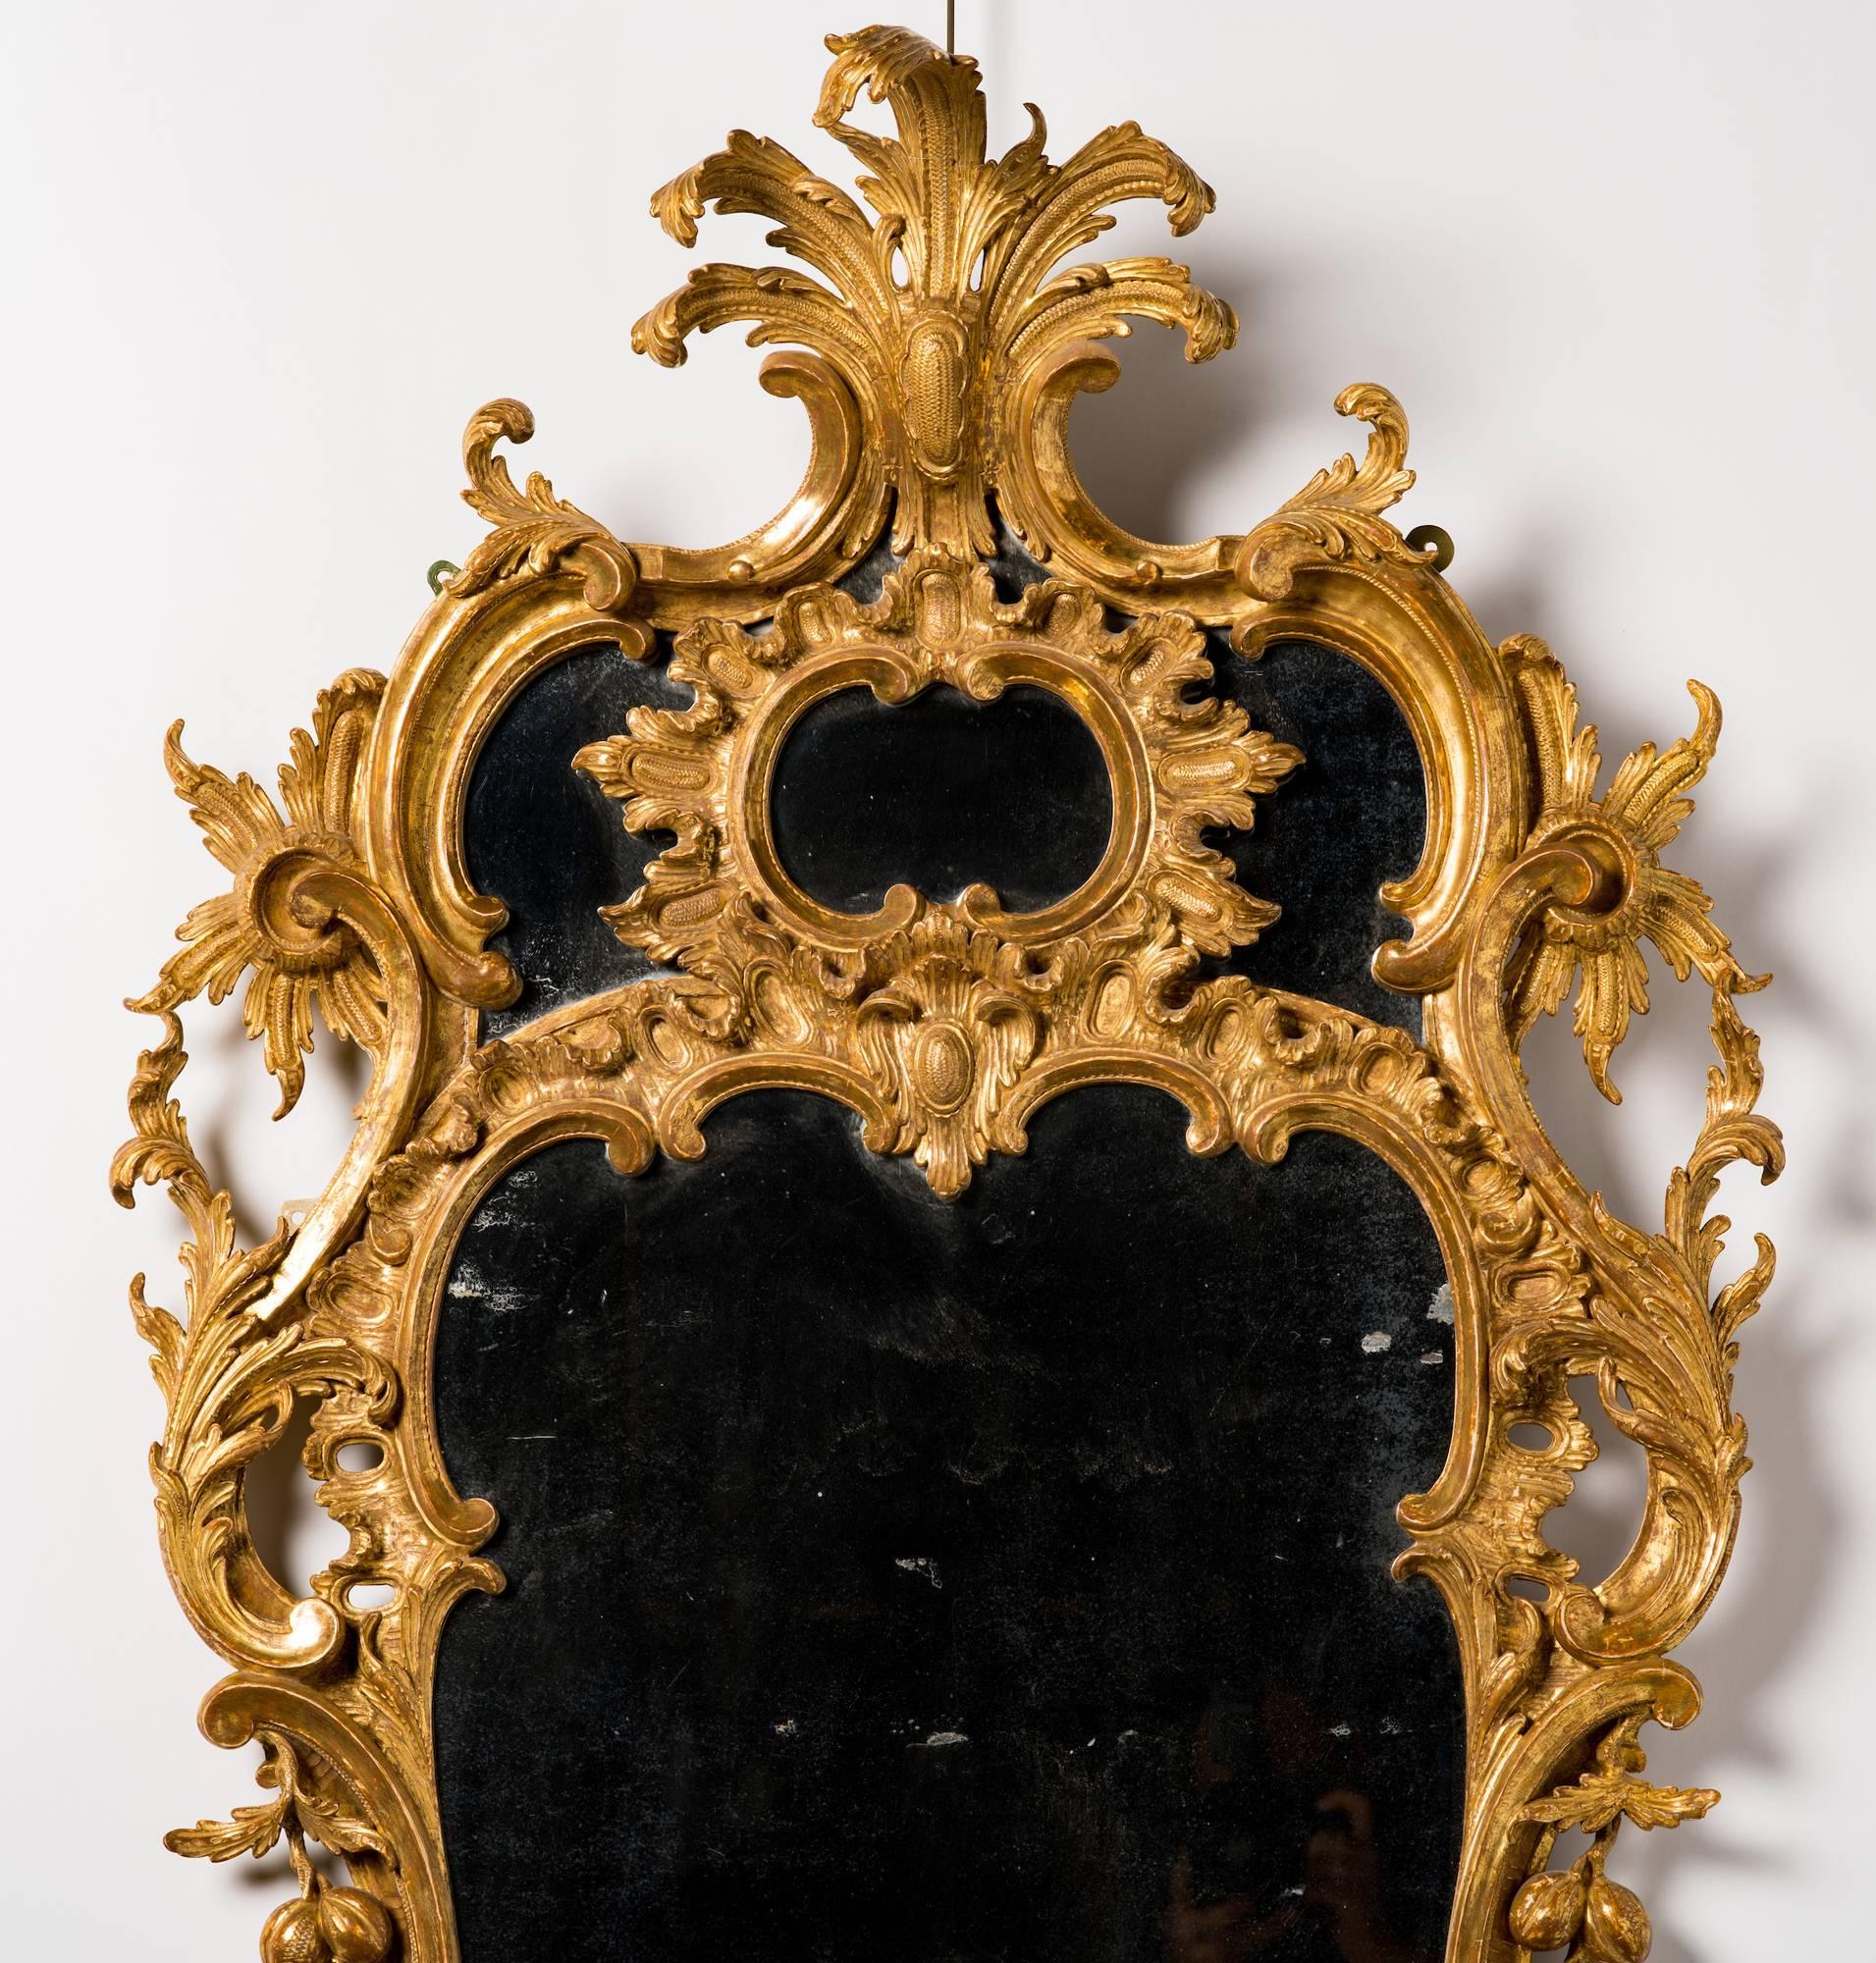 The pierced cartouche-shaped frame with leaf cresting above a divided mirror plate, carved with C-scrolls, cabochons, ruffles and fruiting vinery surrounding the central shaped mirror plate.